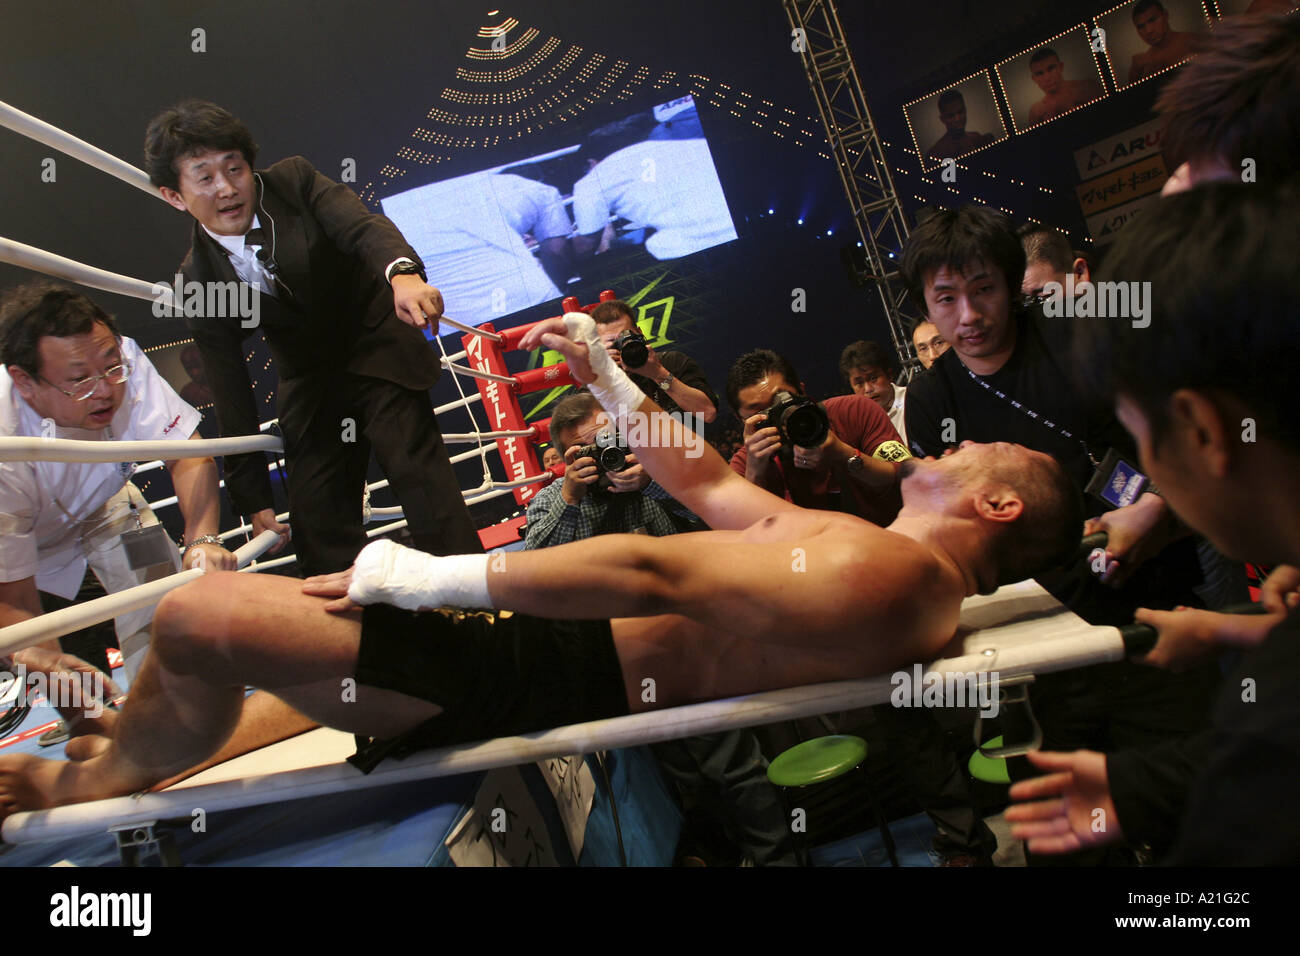 K-1 fighter is carried from the ring on a stretcher after defeat by knock-out, Tokyo, Japan Stock Photo